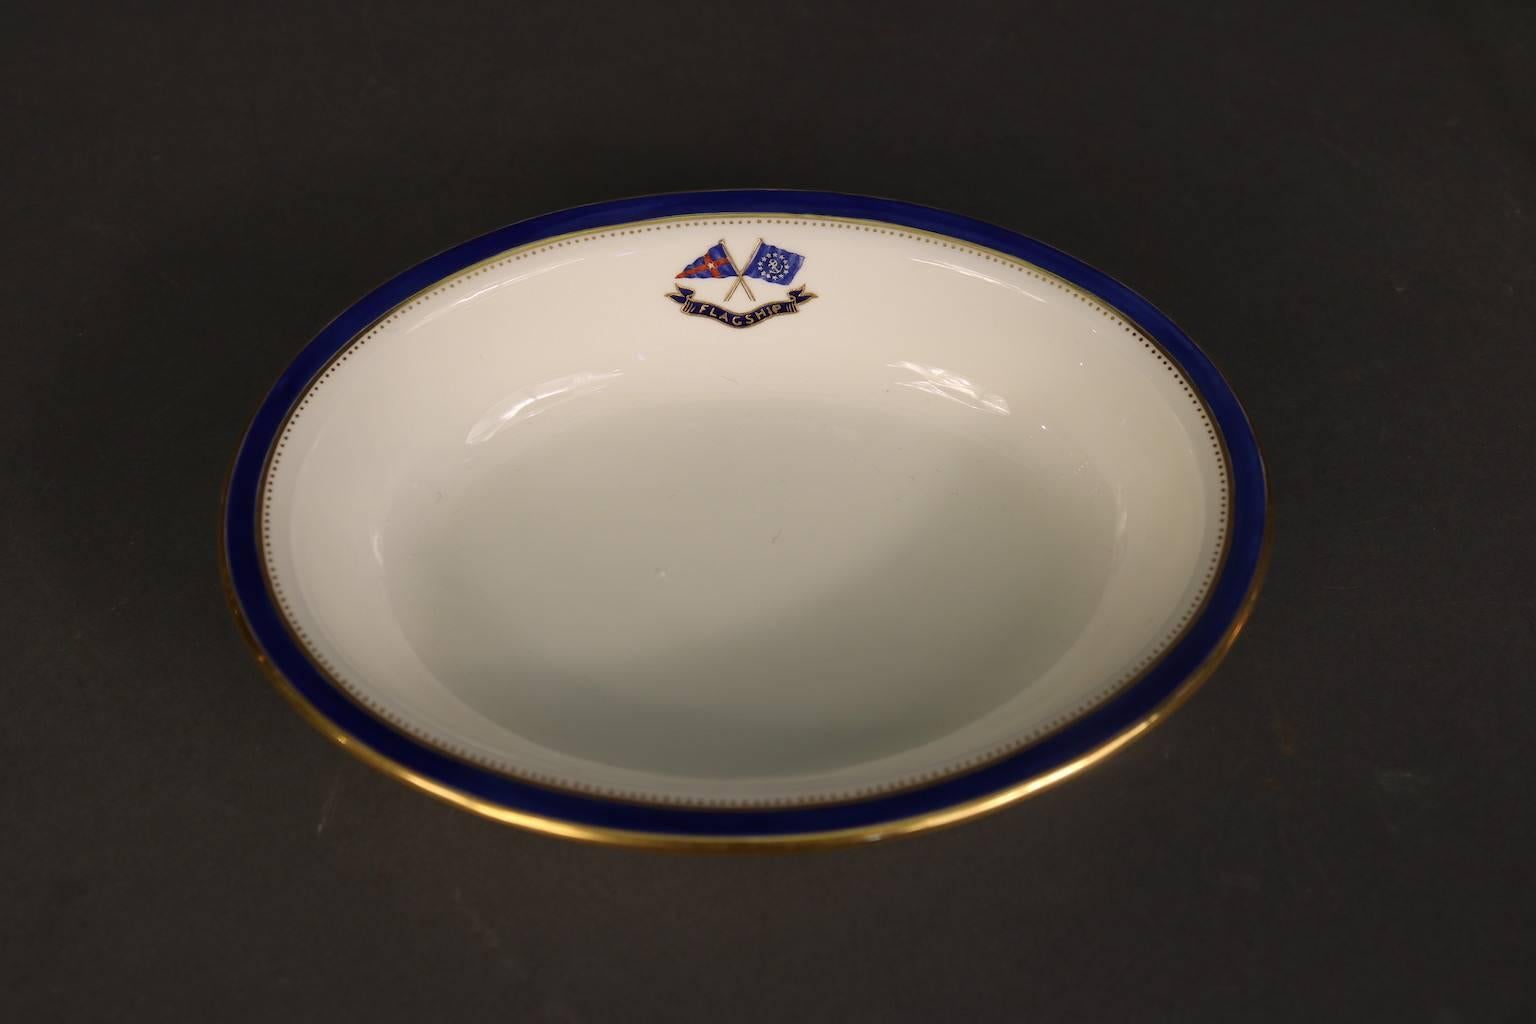 Personal dinnerware made exclusively for J. Pierpont Morgan (1837-1913) for use aboard his Flagship Corsair, built in 1890. This 6” Flagship Corsair vegetable side plate bowl by Minton's has the J. Pierpont Morgan signature navy blue trim with gold